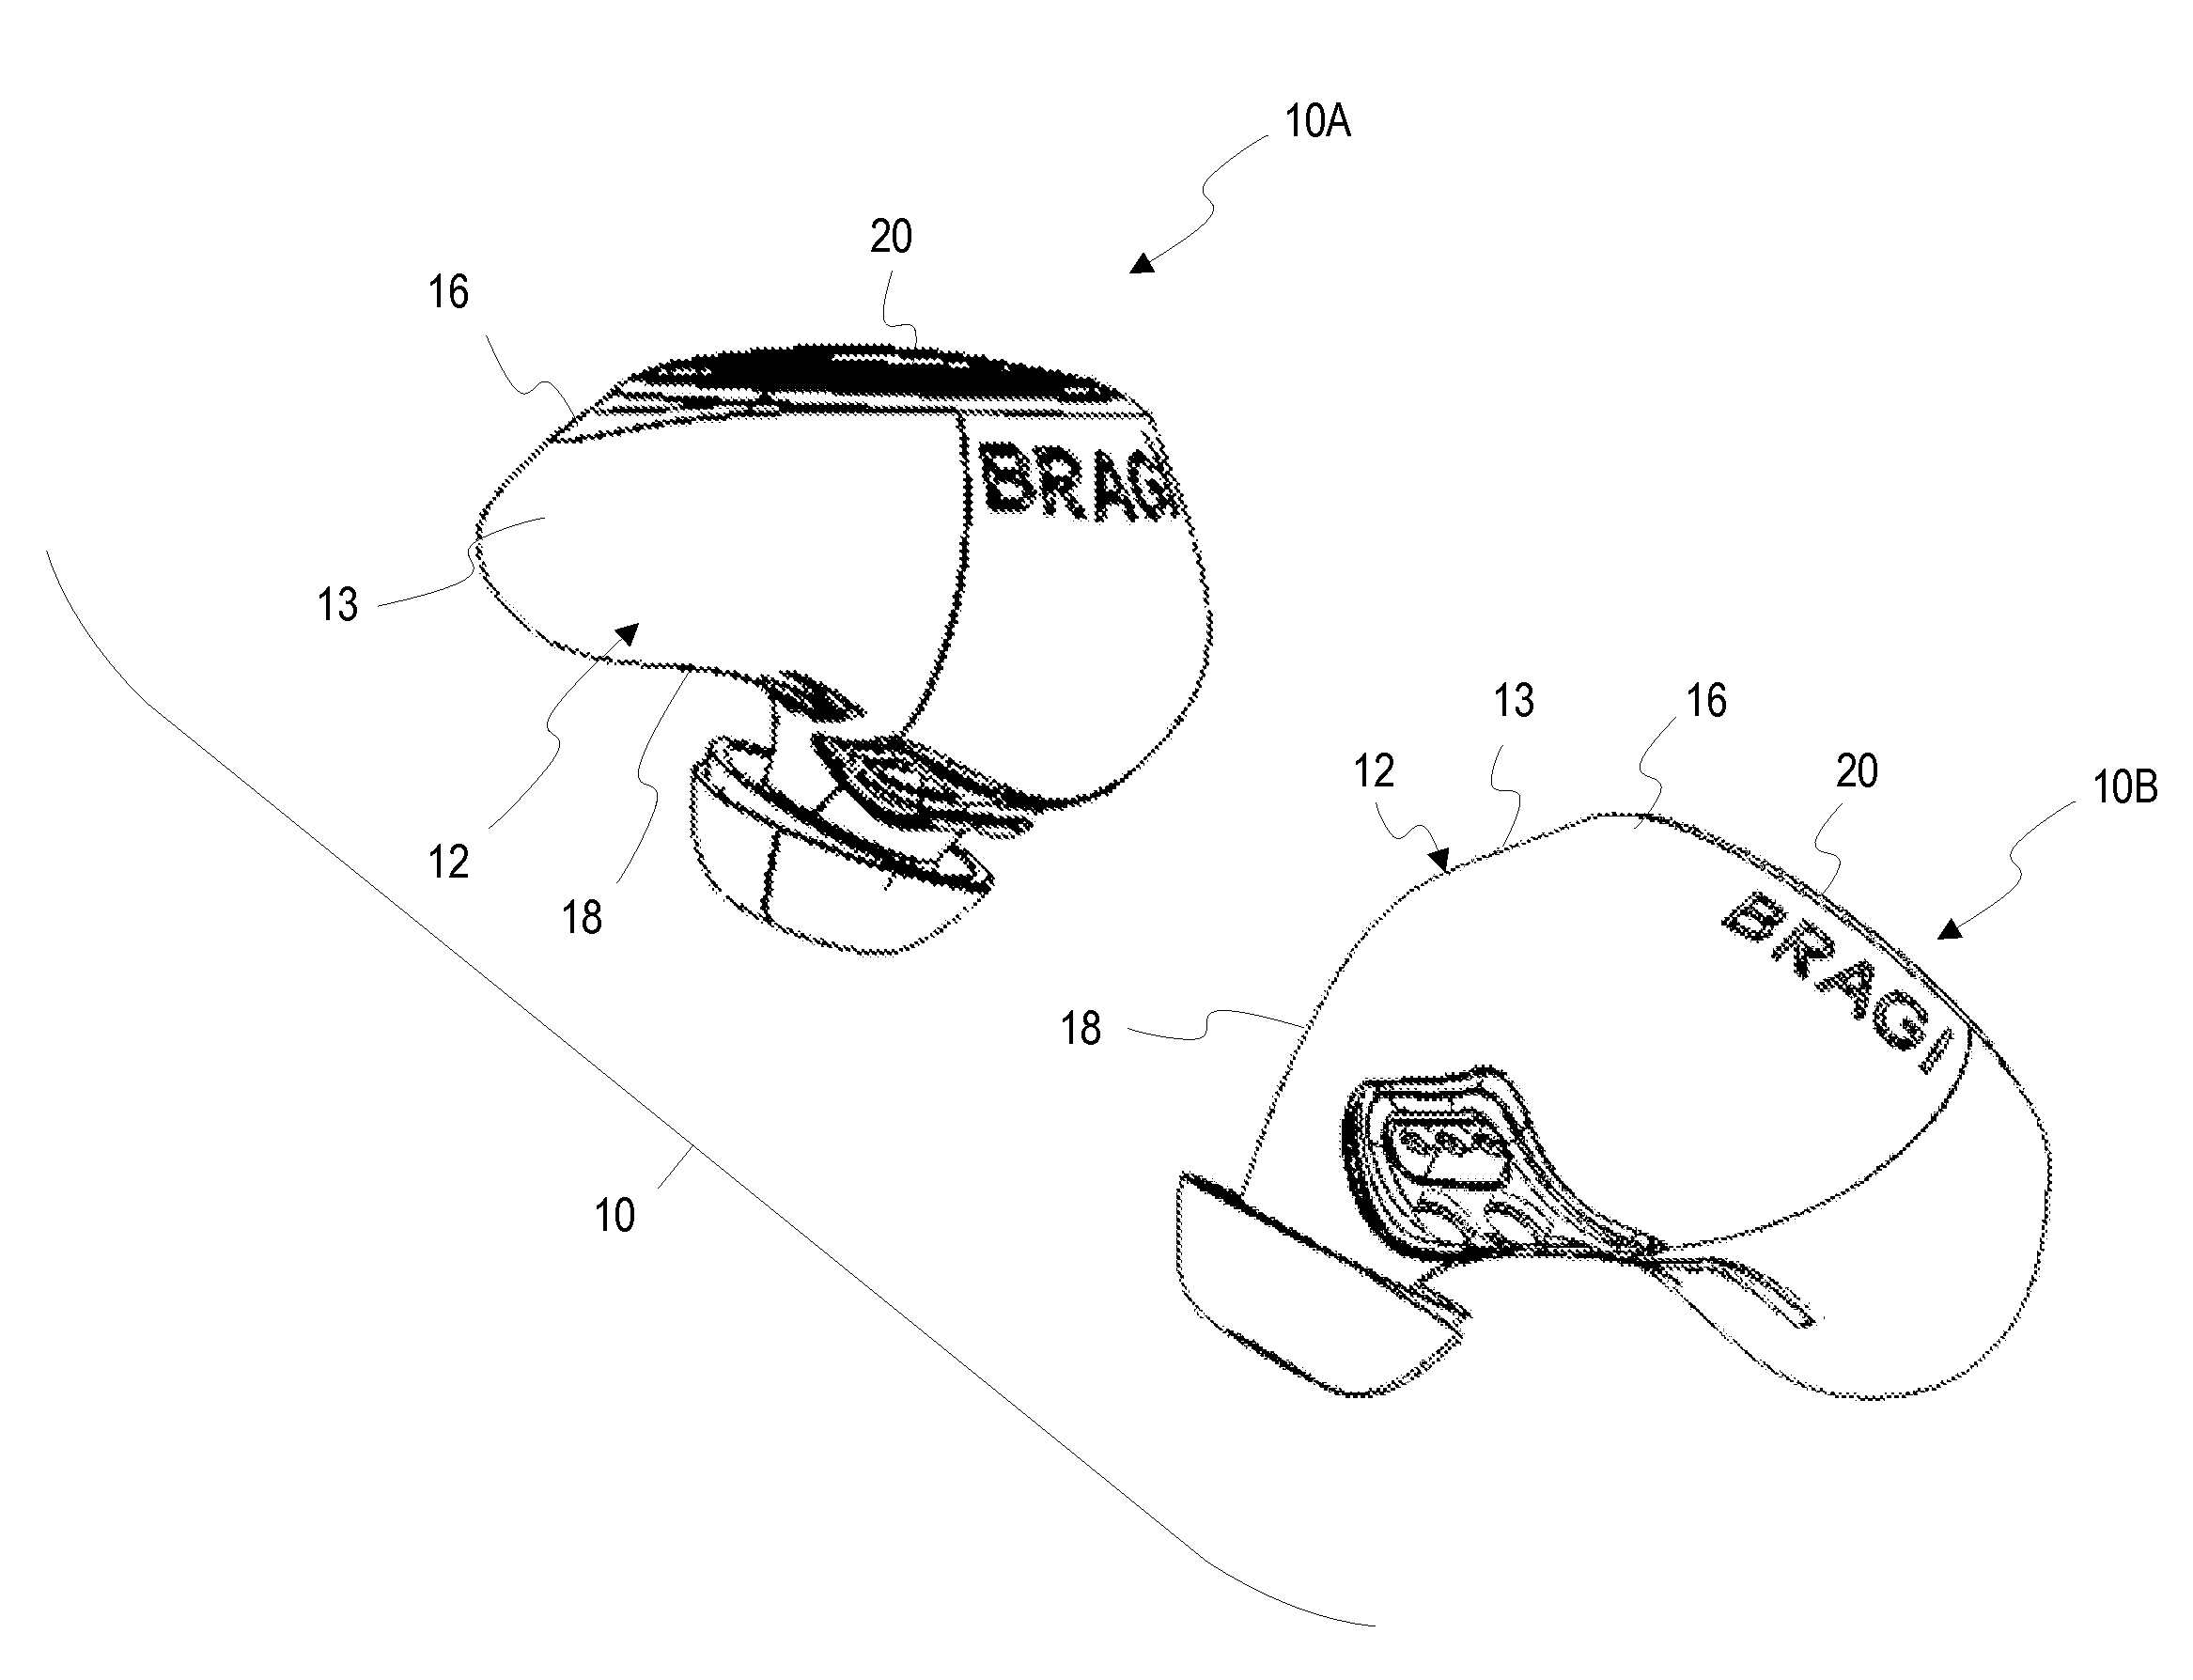 Magnetic Induction Antenna for Use in a Wearable Device